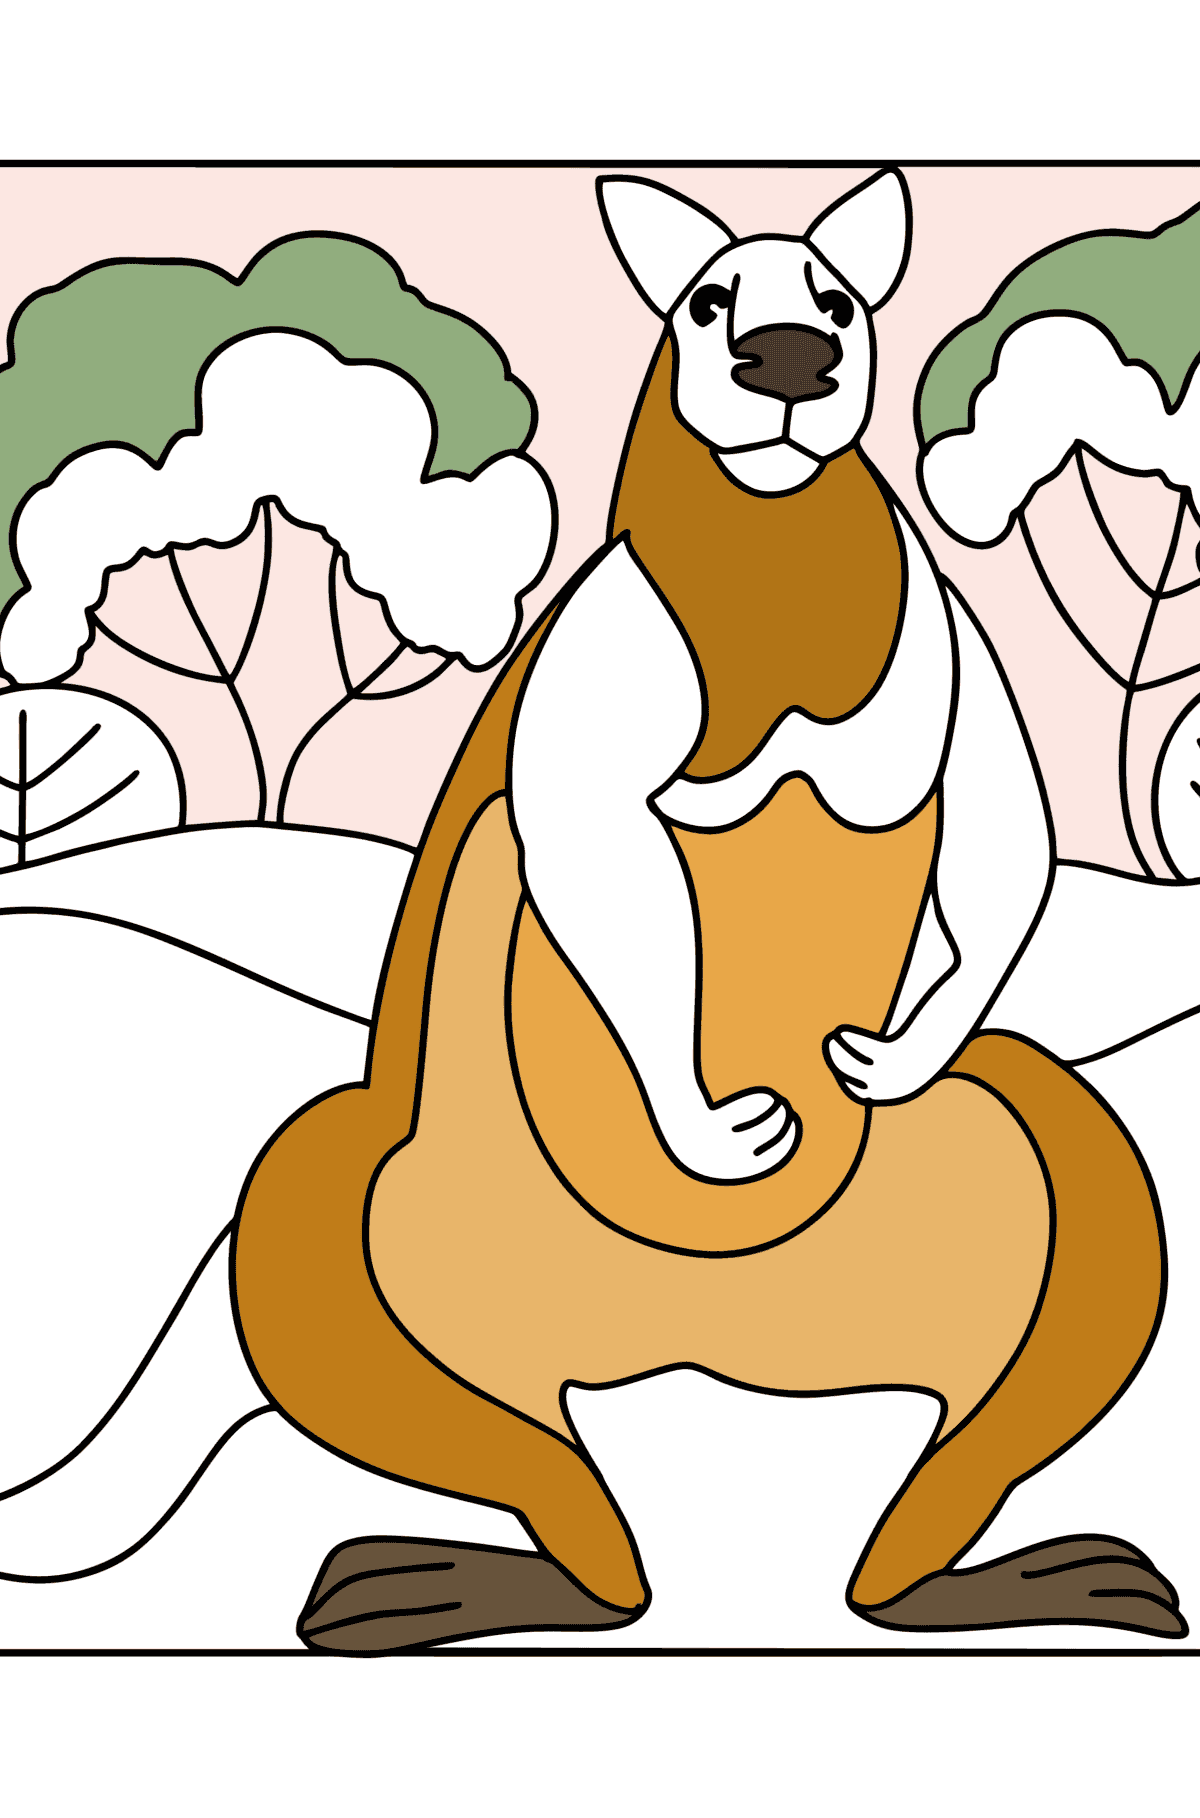 Giant Kangaroo coloring page - Coloring Pages for Kids